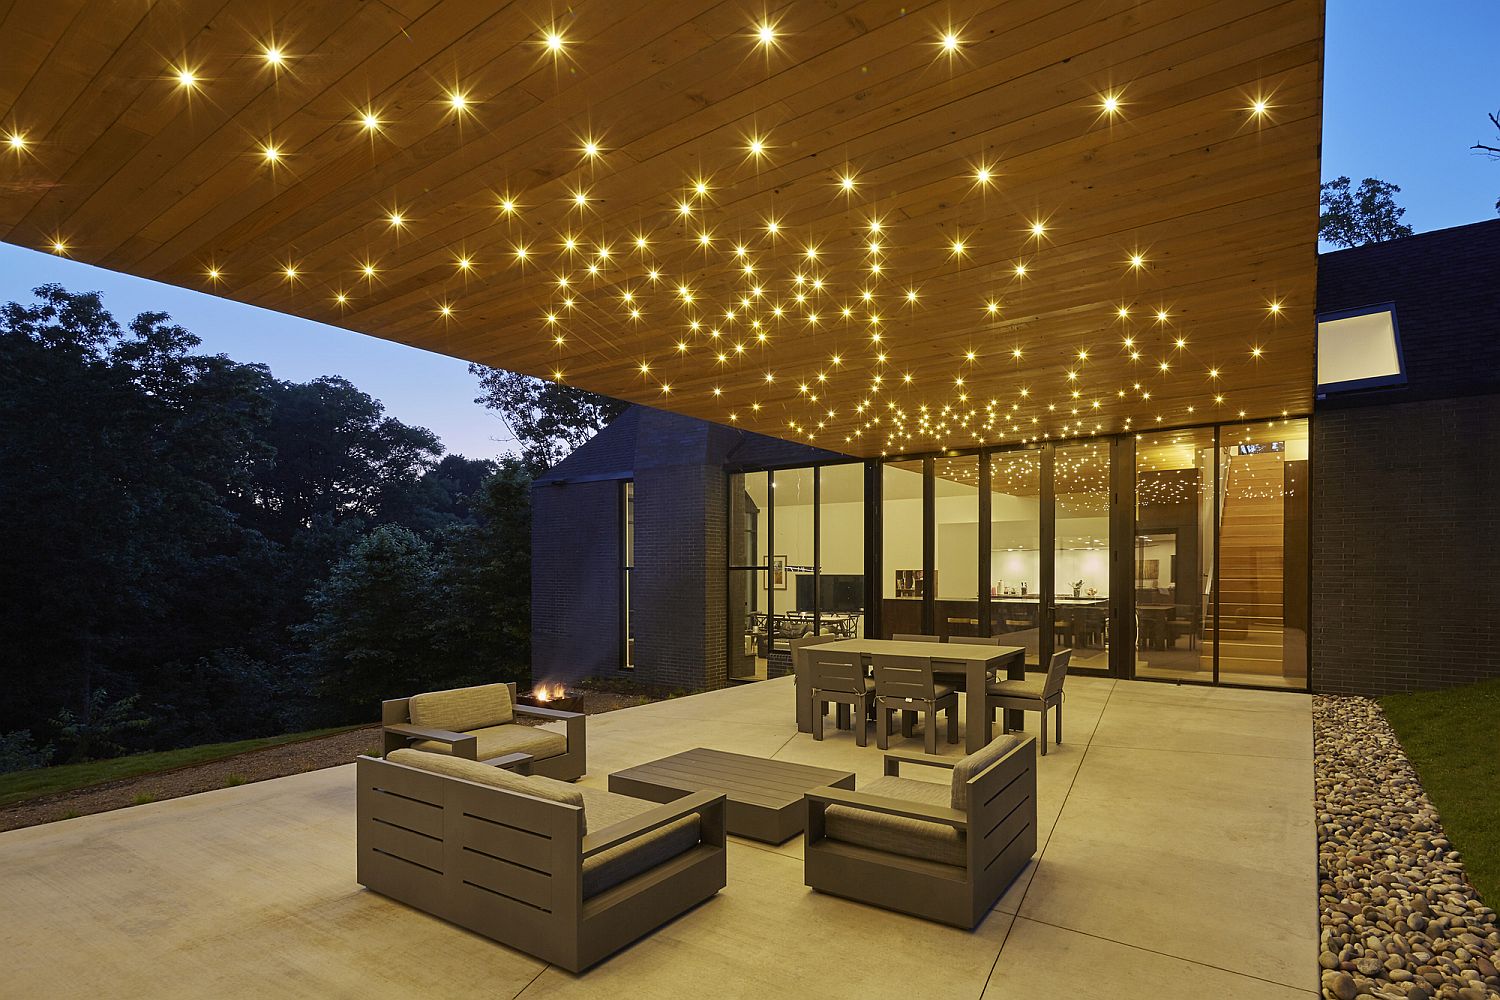 Fabulous sheltered outdoor sitting space with brilliant lighting